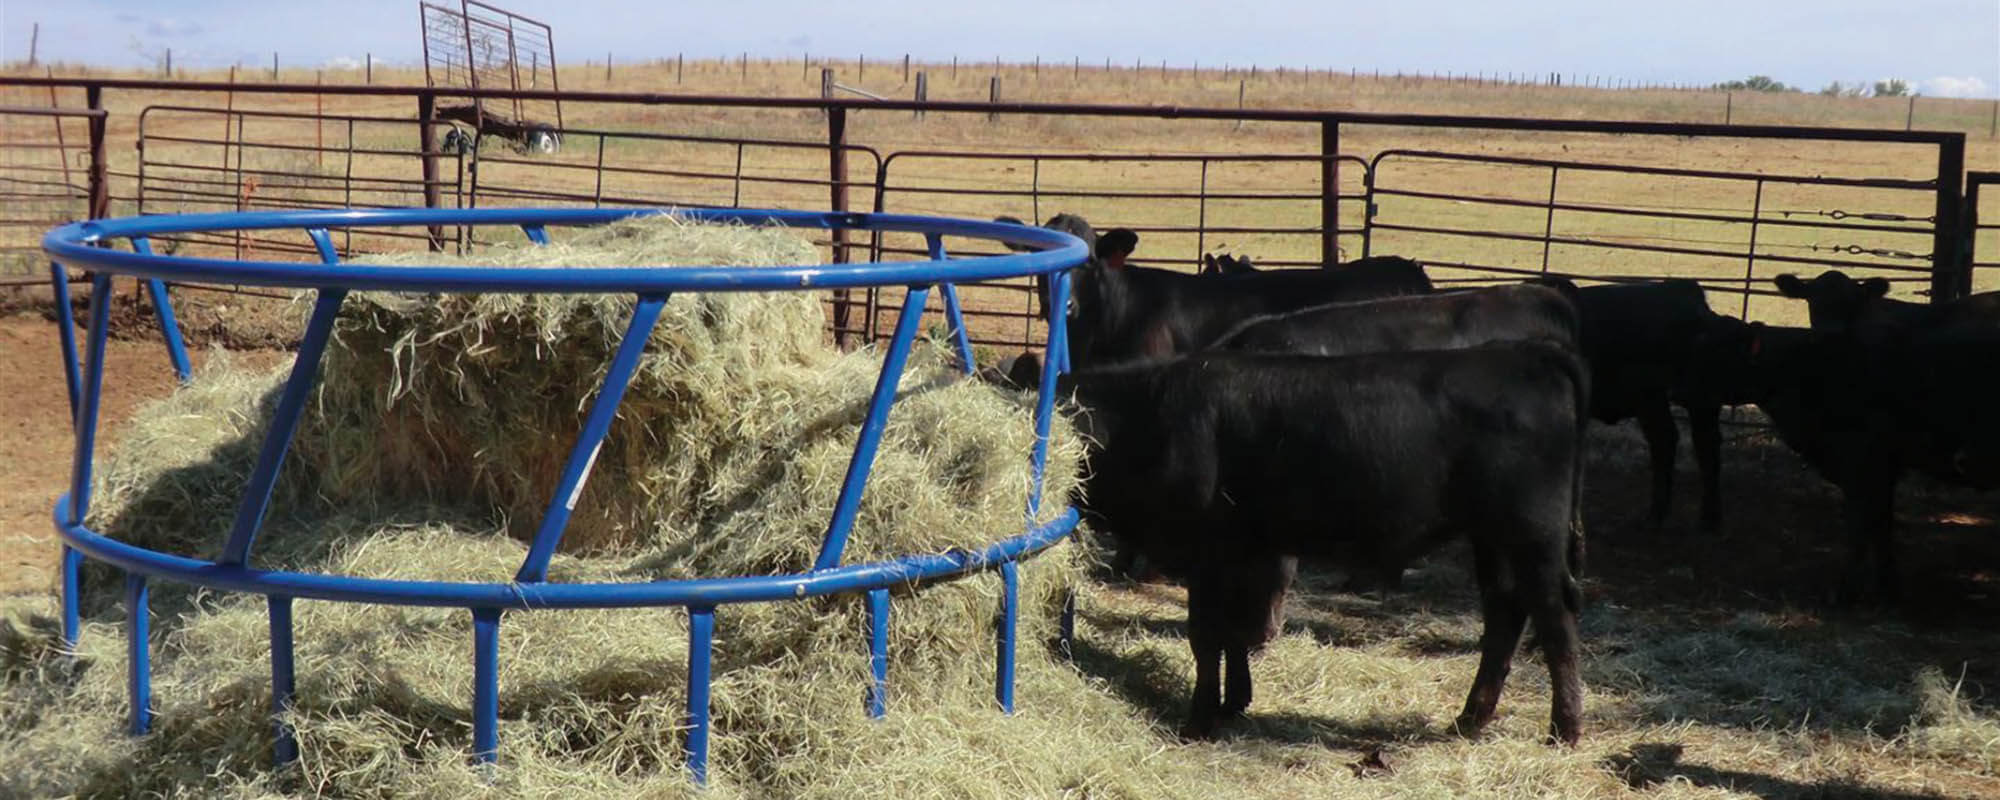 Hay Feeder Design Can Reduce Hay Waste and Cost